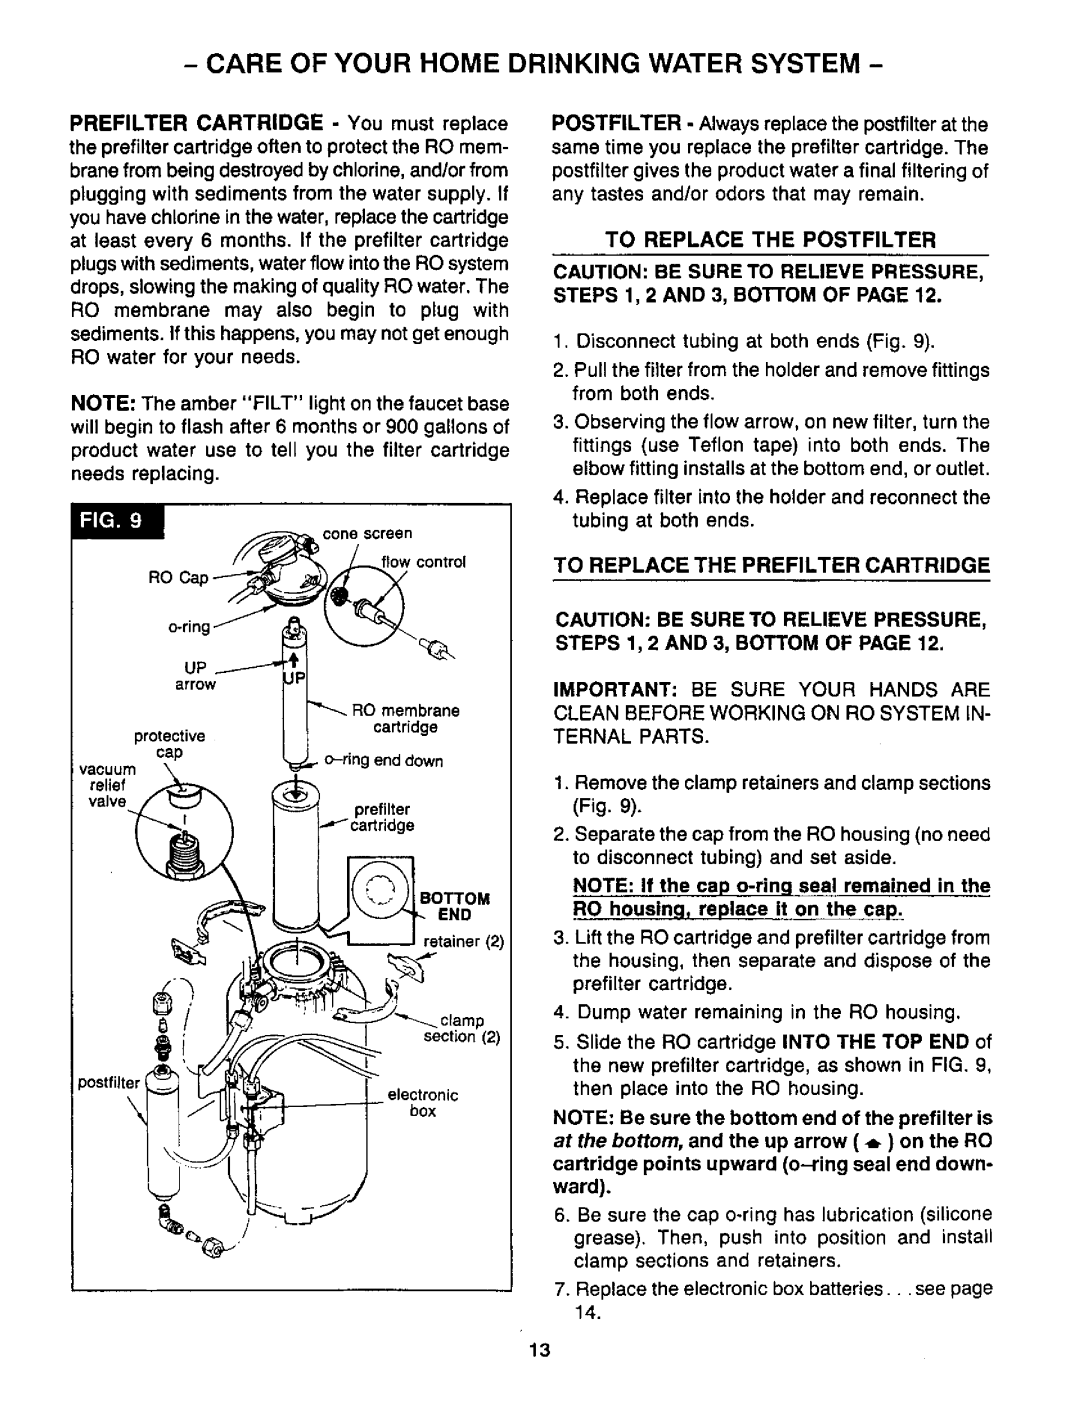 Sears RO 2000 manual To Replace The Prefilter Cartridge, Care Of Your Home Drinking Water System 